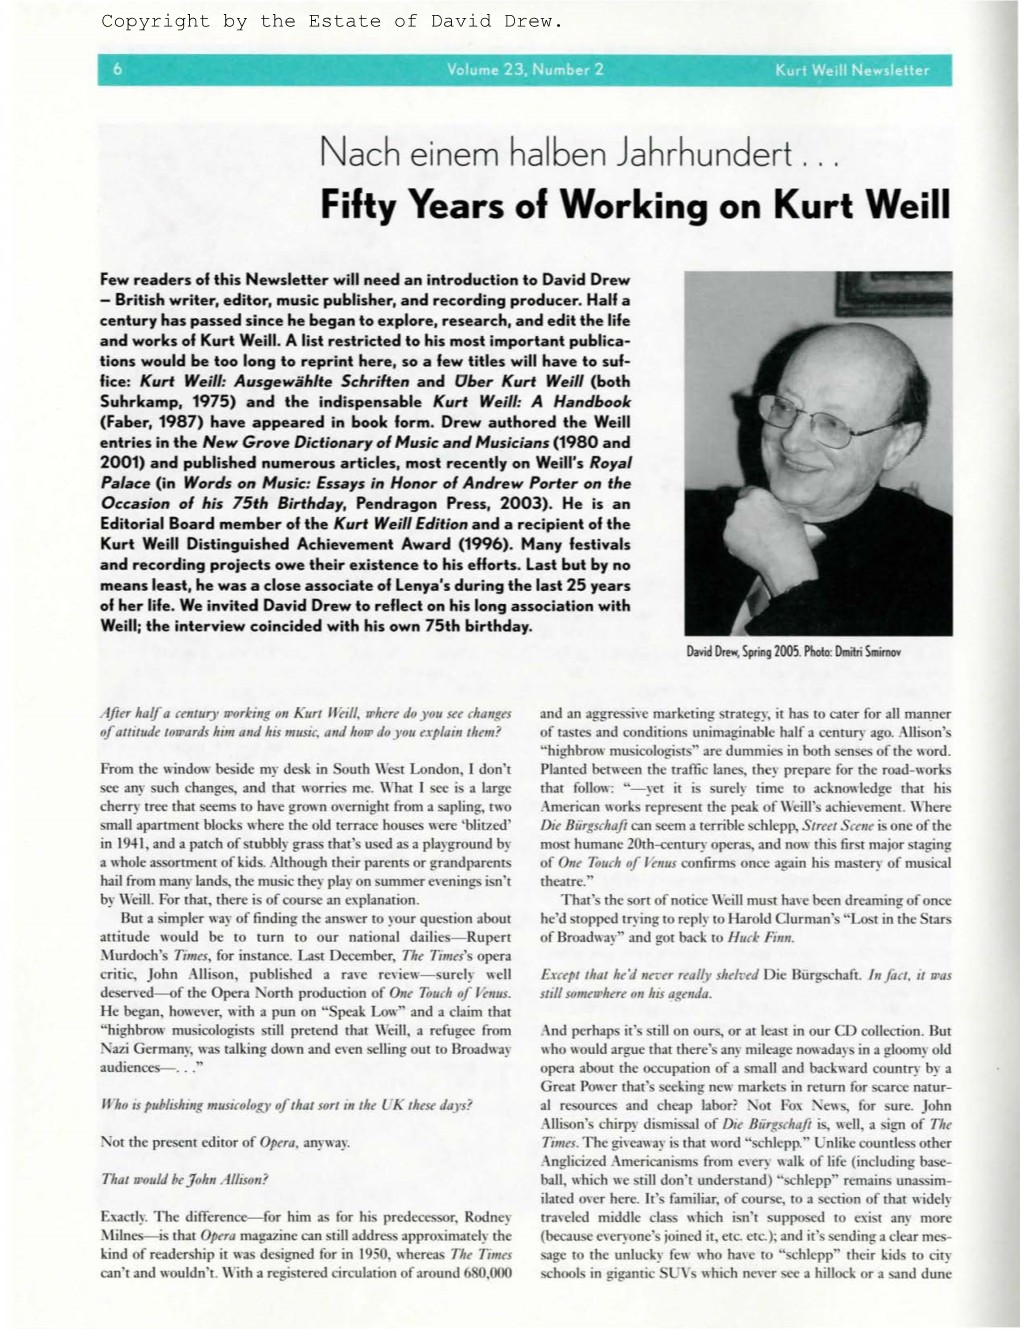 Fifty Years of Working on Kurt Weill